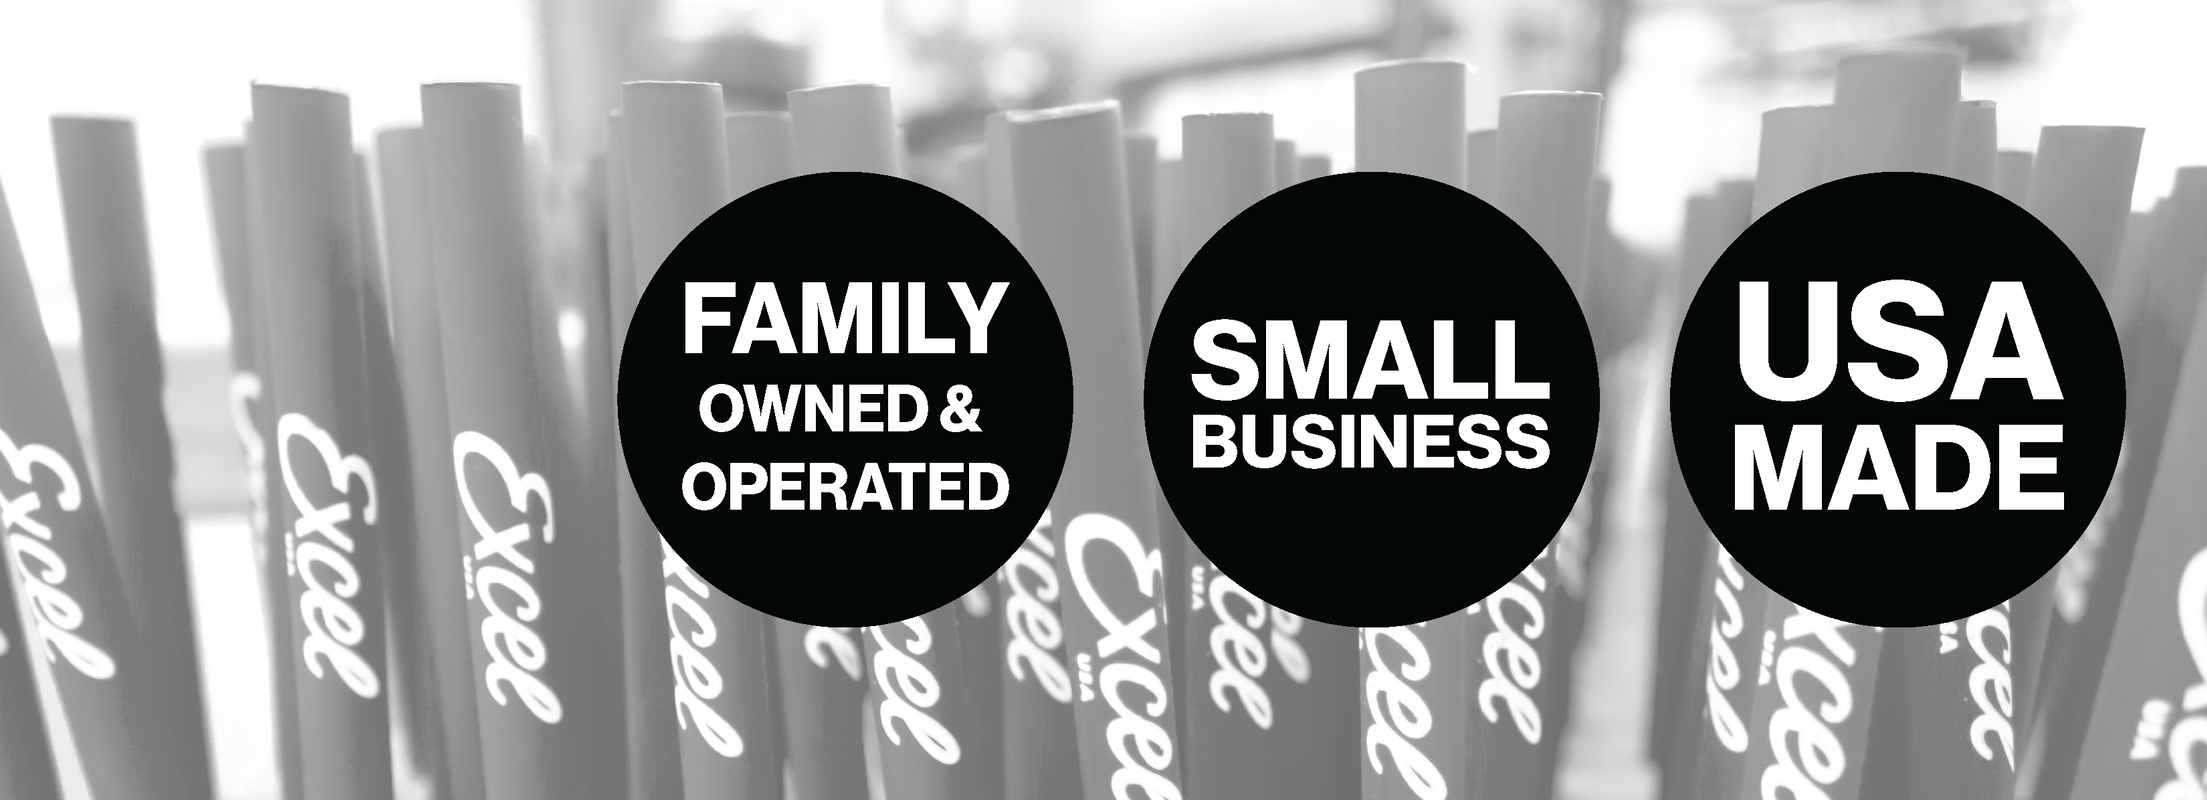 Excel Blades Brand icons family owned and operated small business made in USA. 